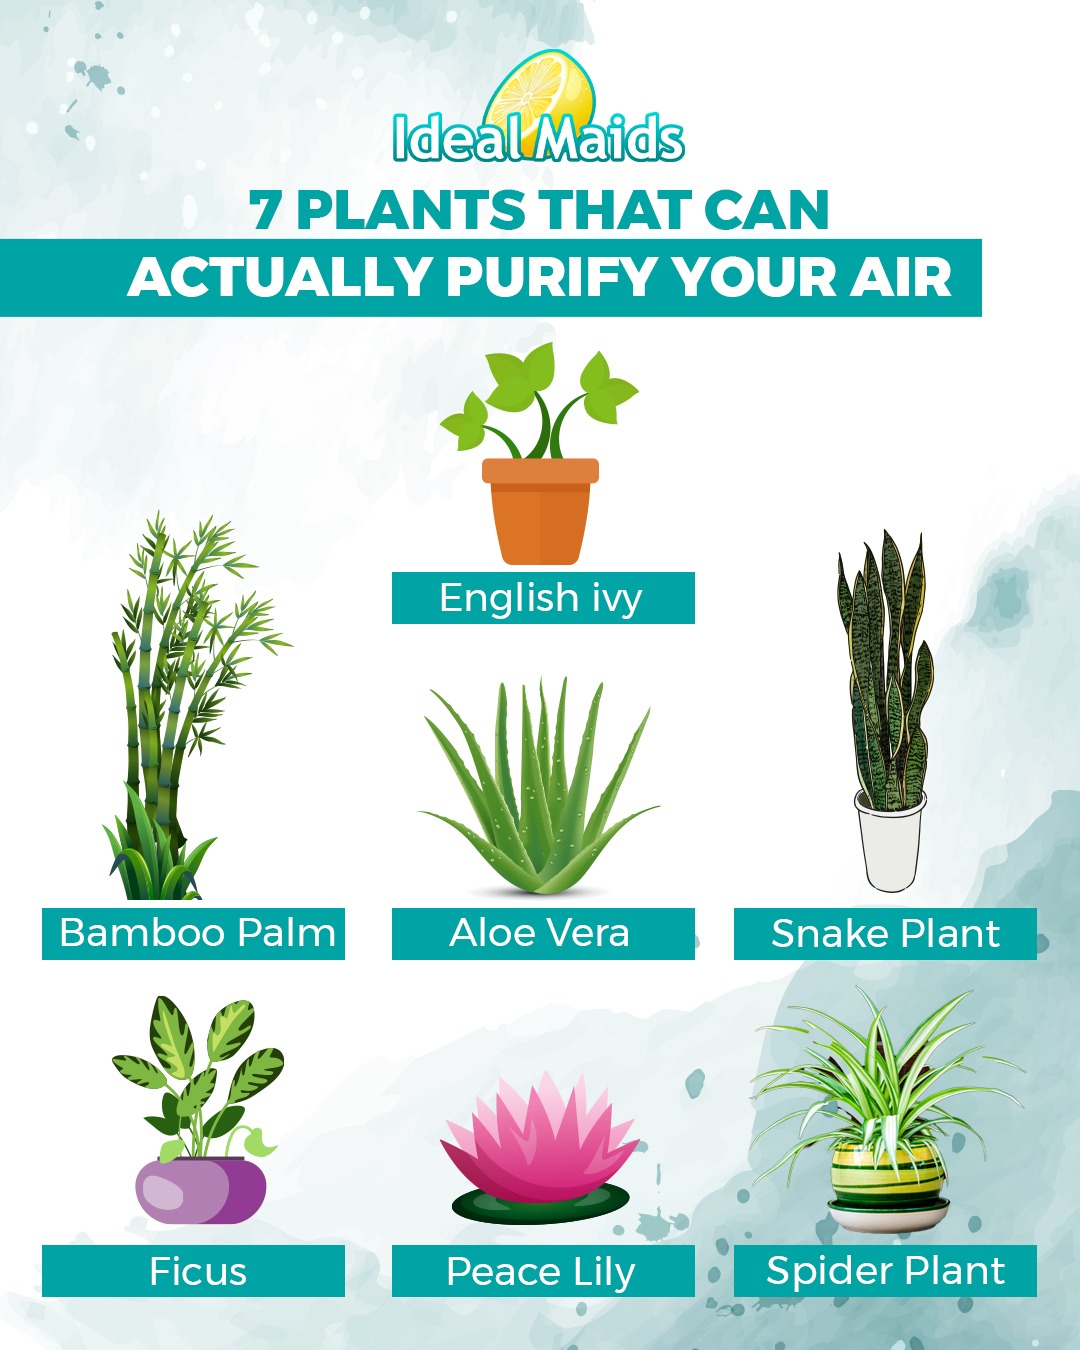 7 Plants than can actually purify your AIR.